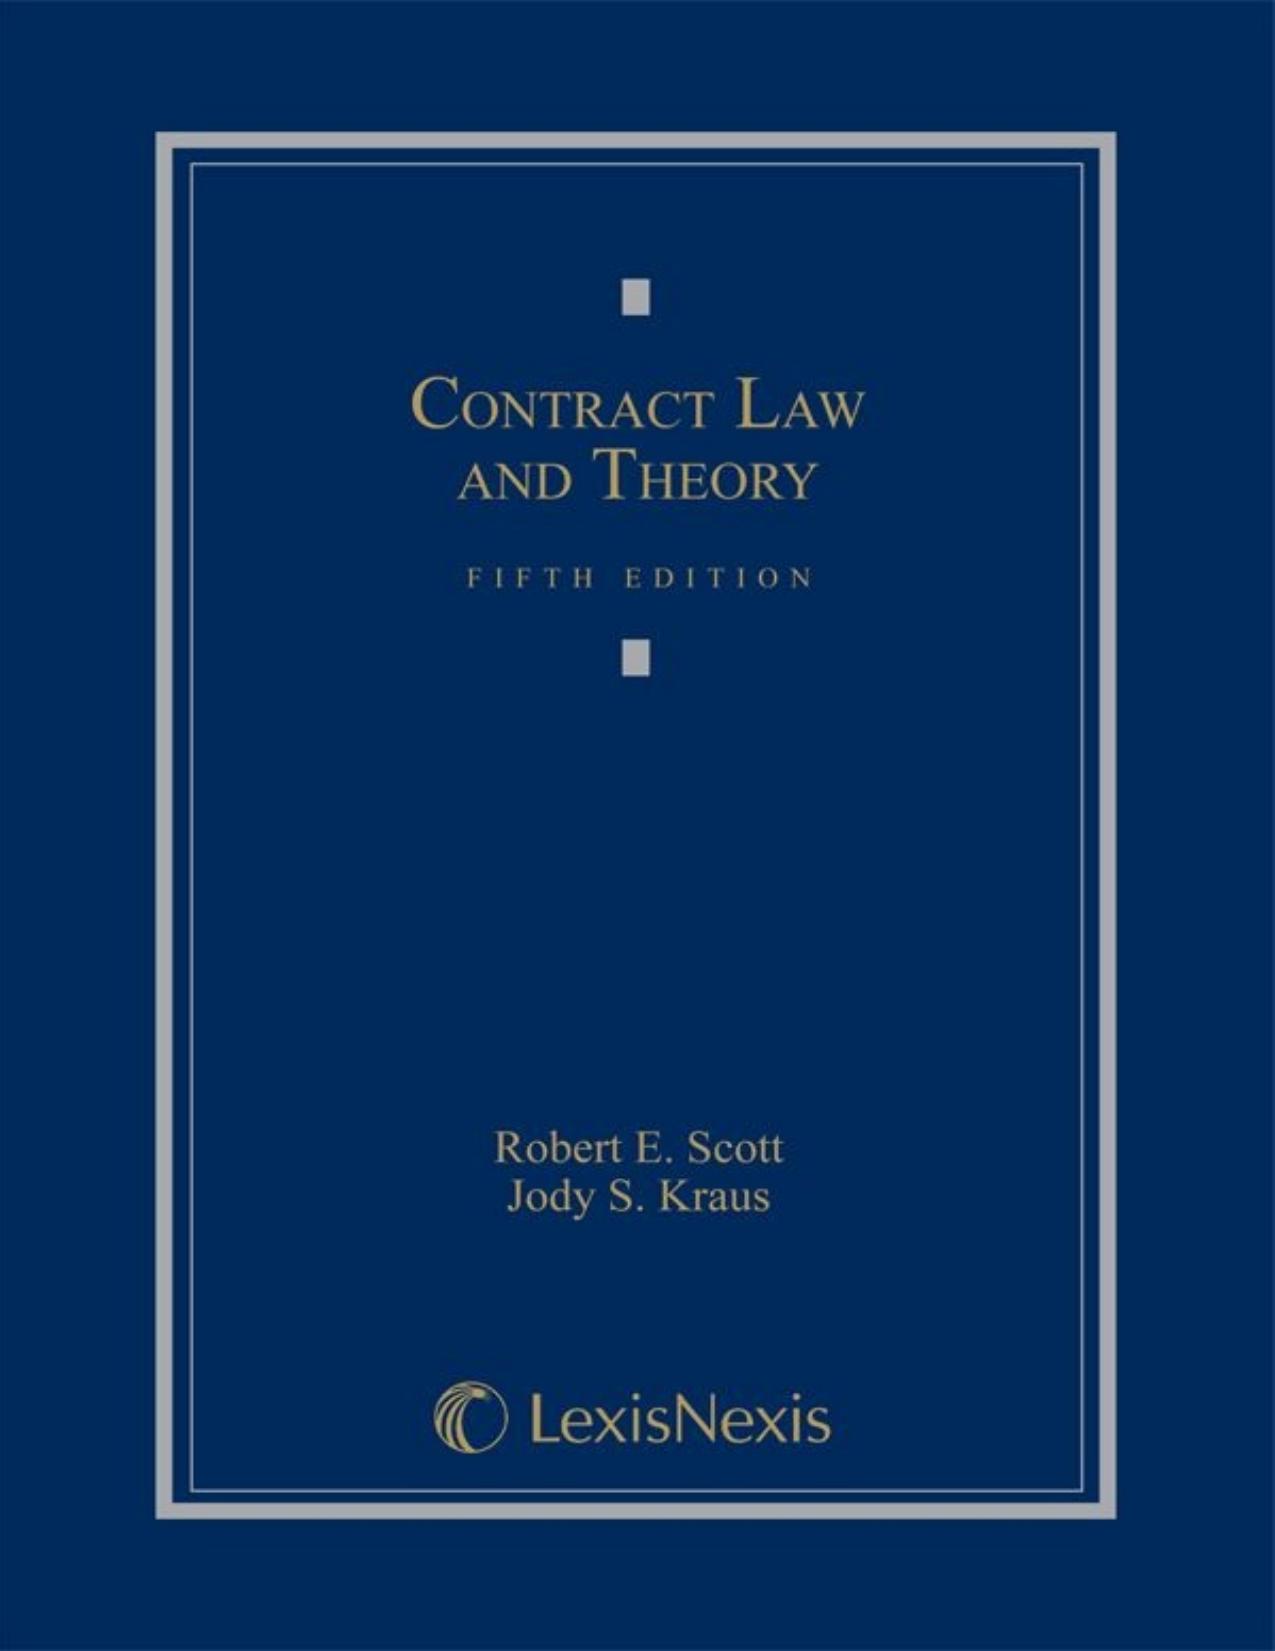 Contract Law and Theory, Fifth Edition - Robert E. Scott & Jody S. Kraus.jpg